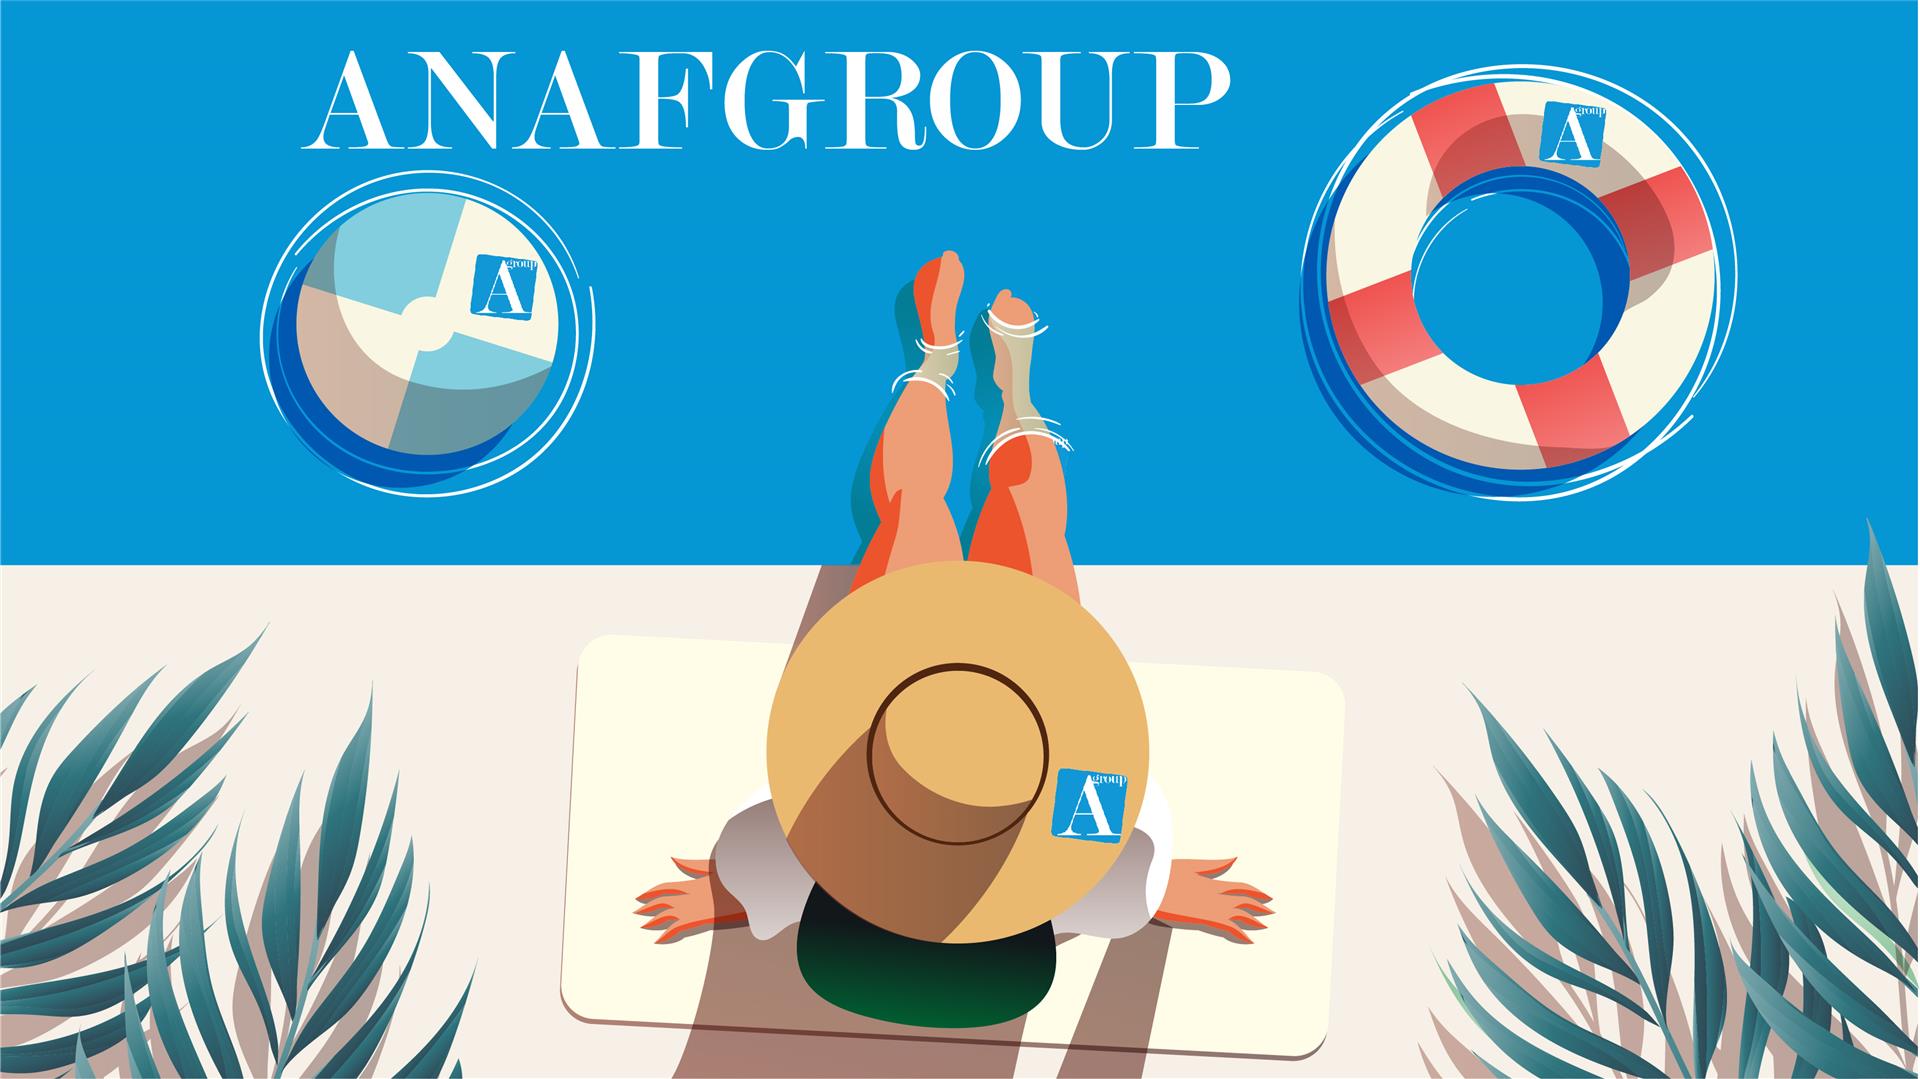 Anafgroup: Happy Holidays to all!